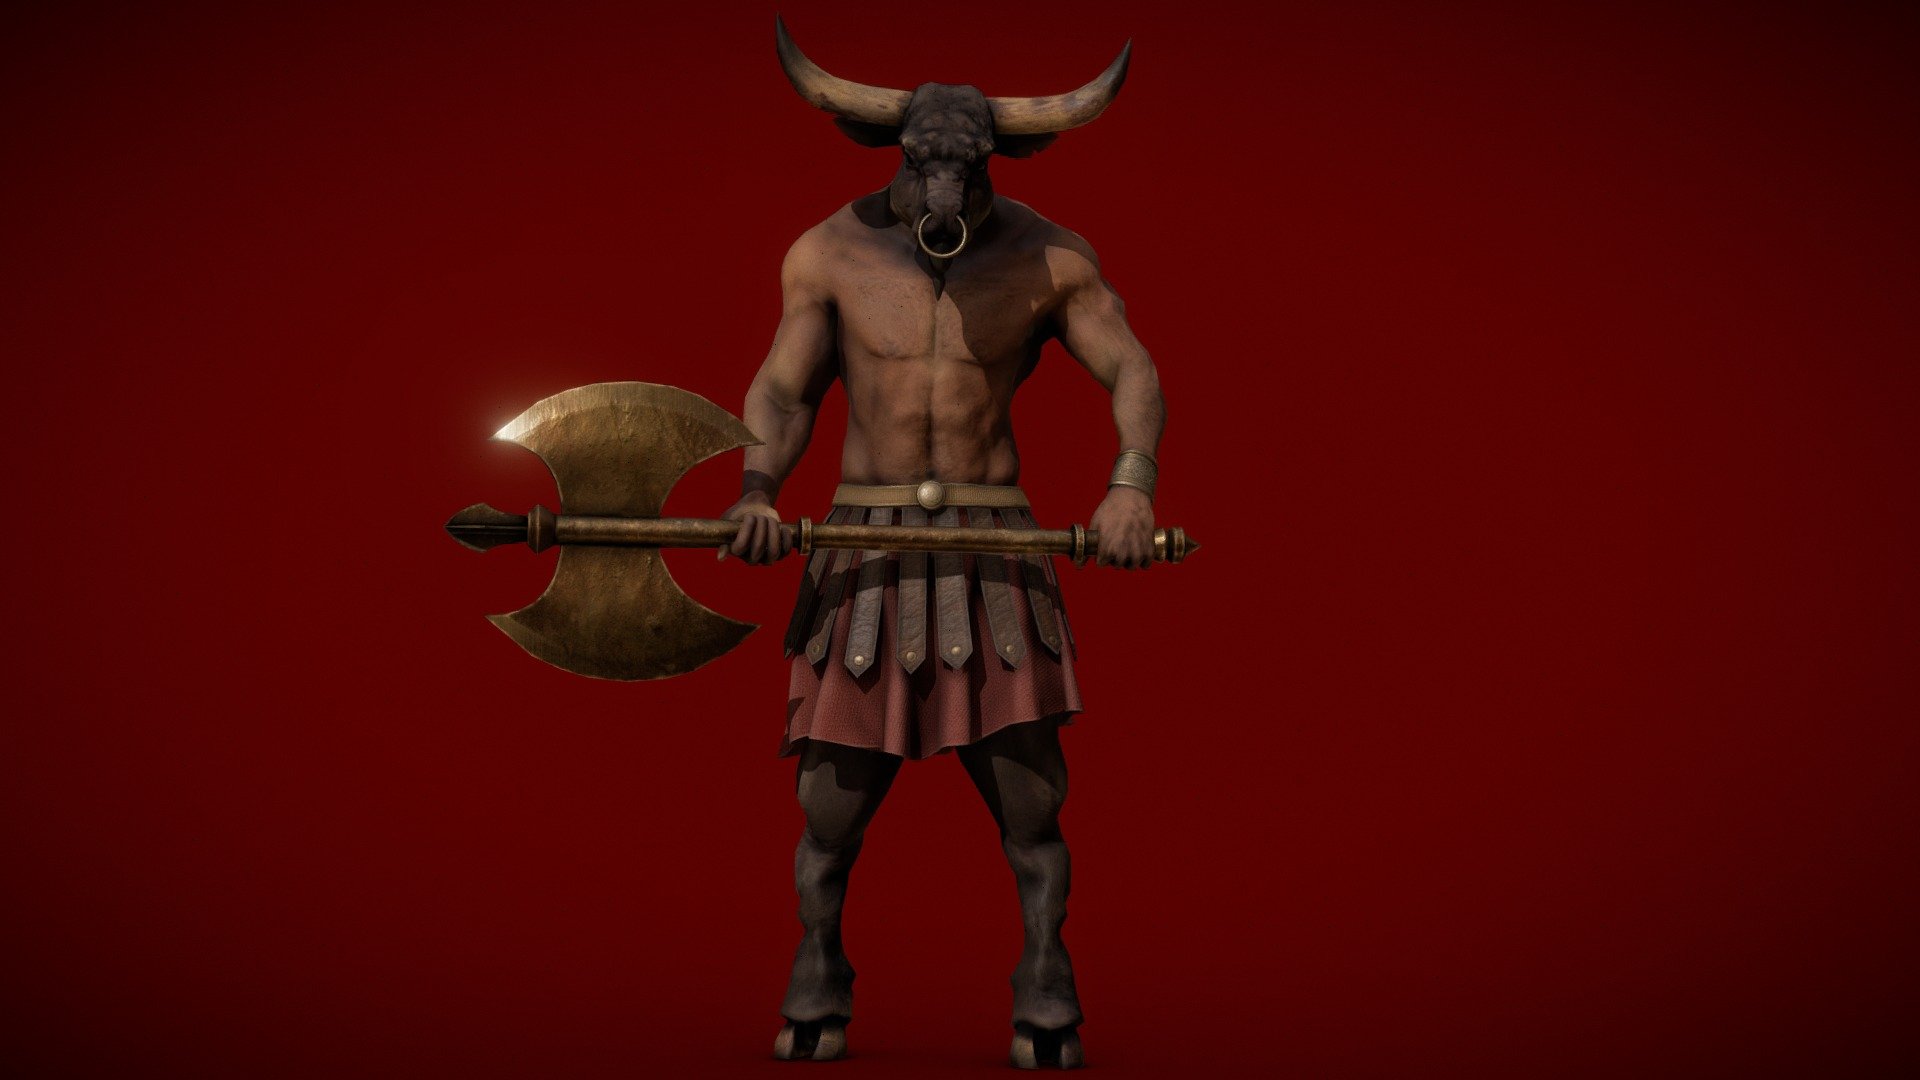 Minotaur, Greek Minotauros (“Minos’s Bull”), in Greek mythology, a fabulous monster of Crete that had the body of a man and the head of a bull. It was the offspring of Pasiphae, the wife of Minos, and a snow-white bull sent to Minos by the god Poseidon for sacrifice. Minos, instead of sacrificing it, kept it alive; Poseidon as a punishment made Pasiphae fall in love with it. Her child by the bull was shut up in the Labyrinth created for Minos by Daedalus 3d model